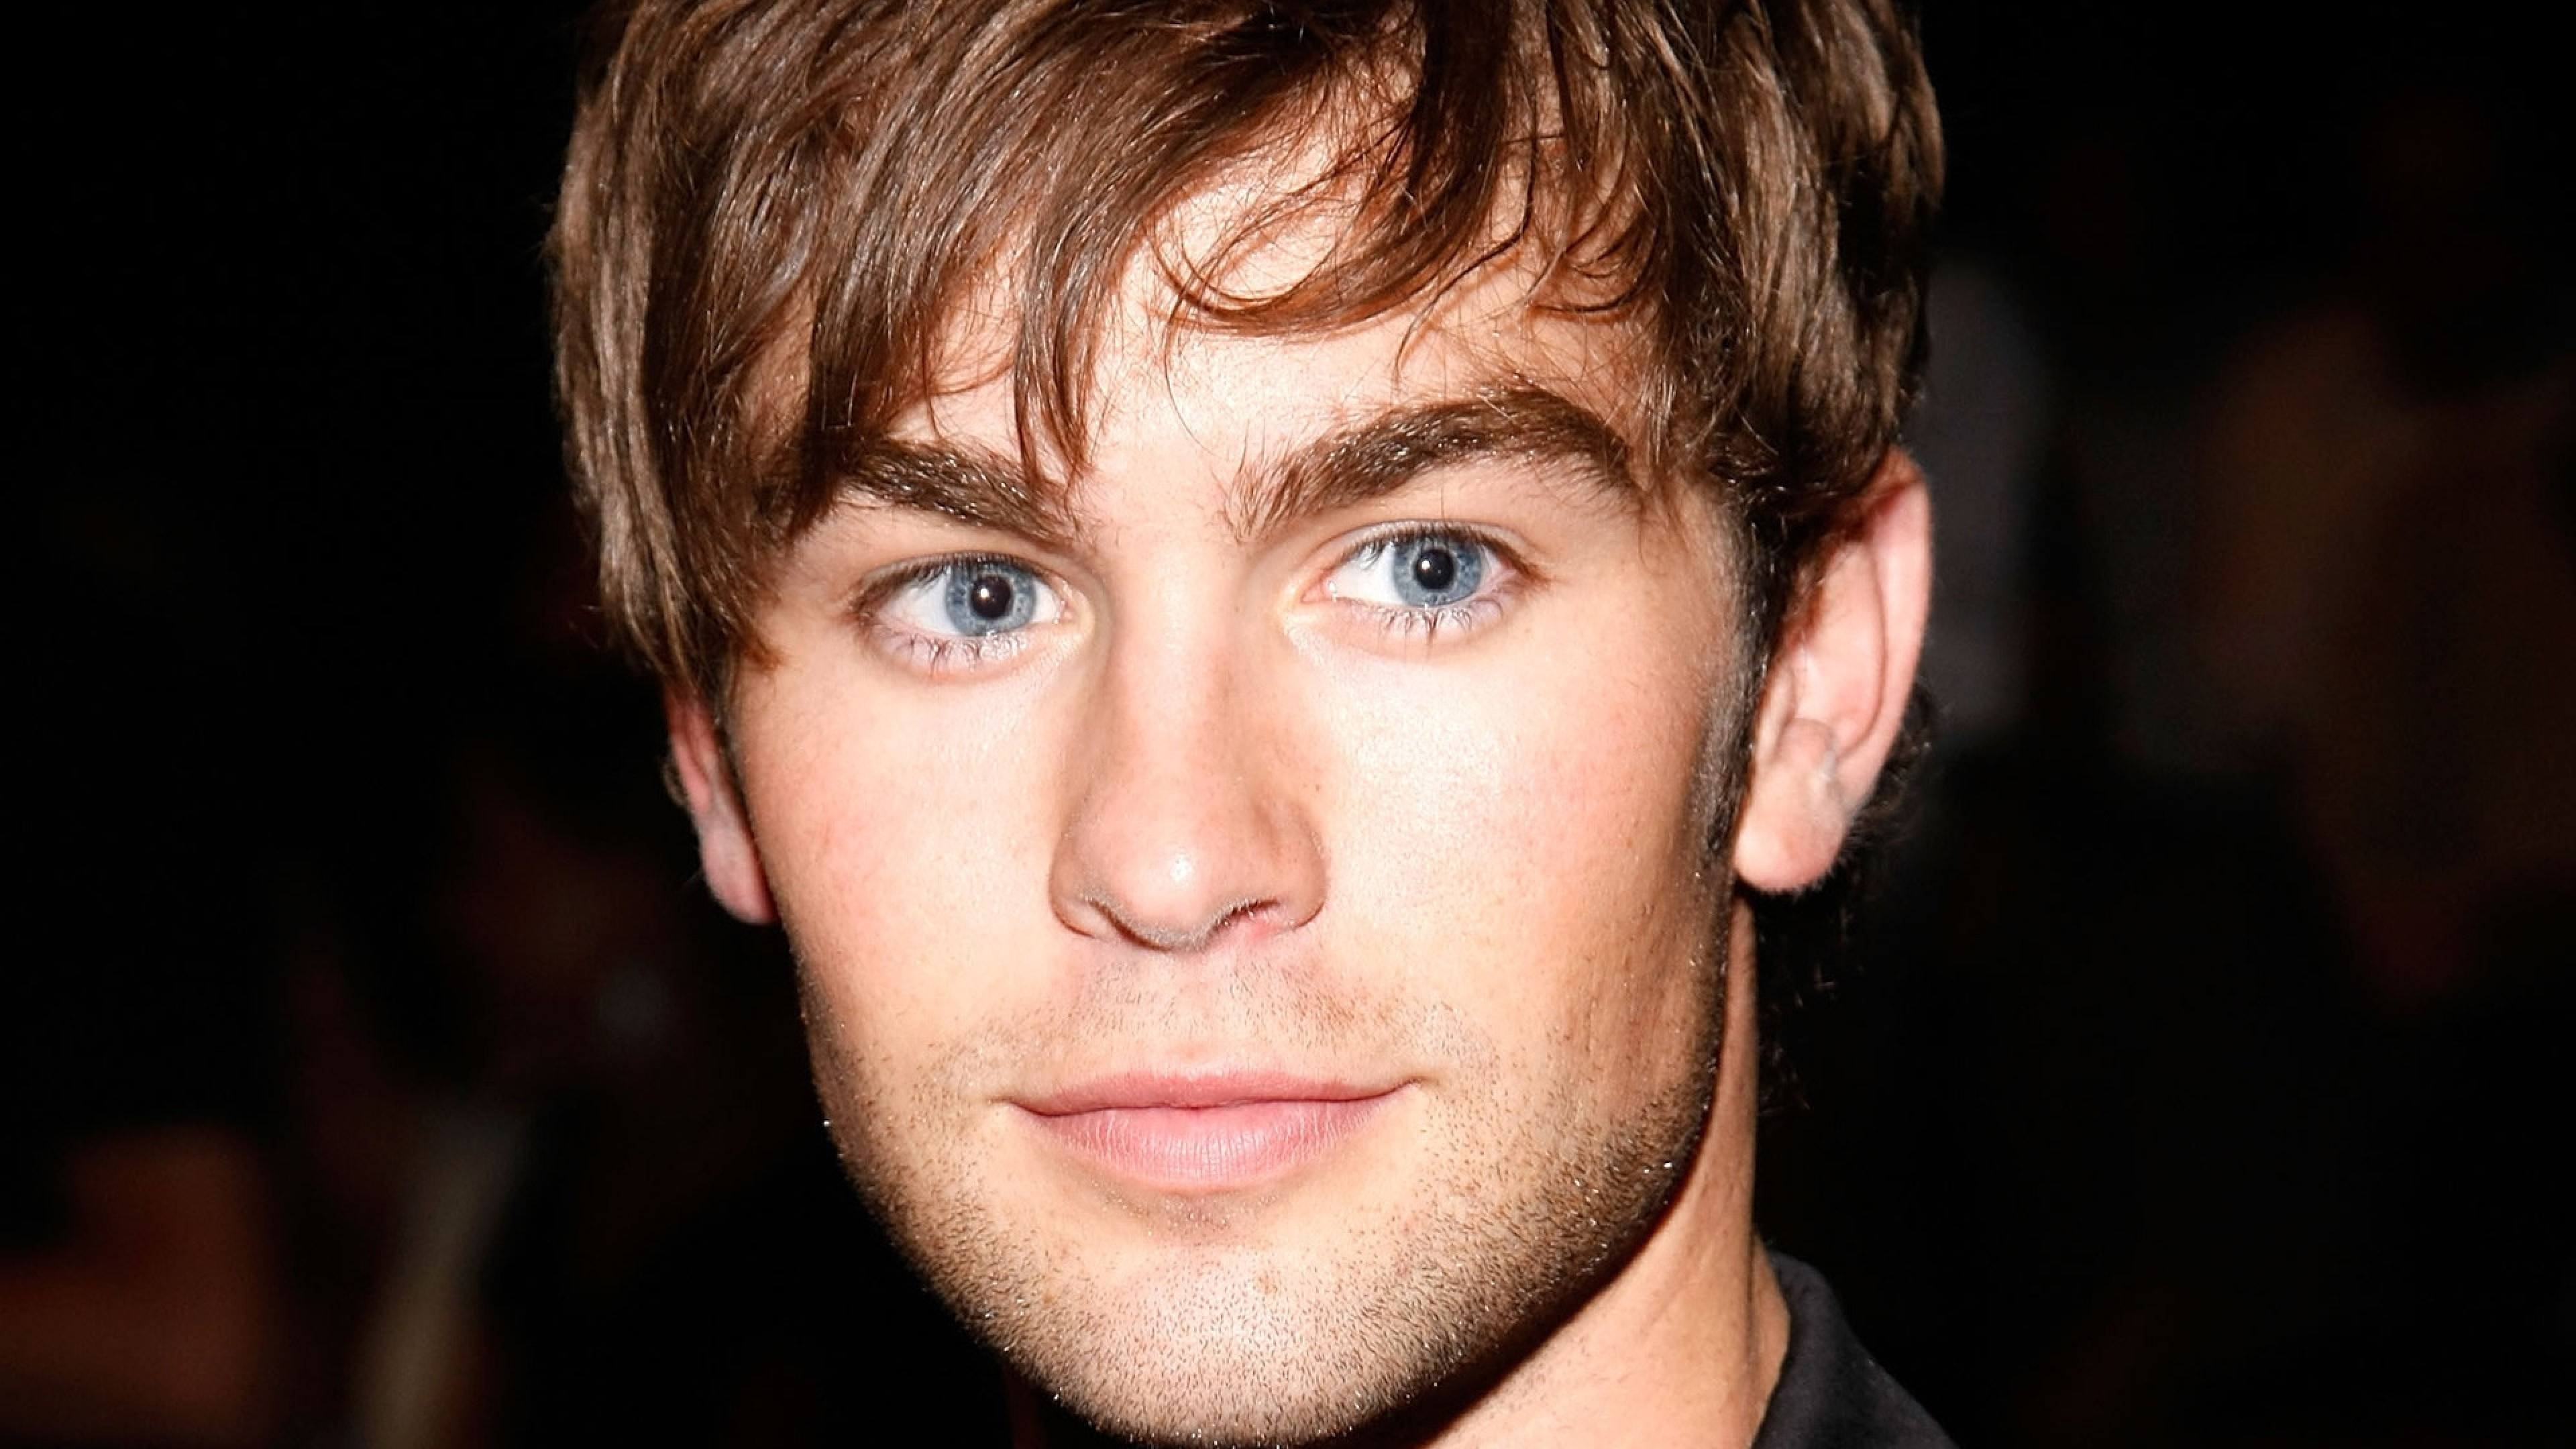 Chace Crawford: An American actor, Nate Archibald in The CW's teen drama series Gossip Girl. 3840x2160 4K Background.